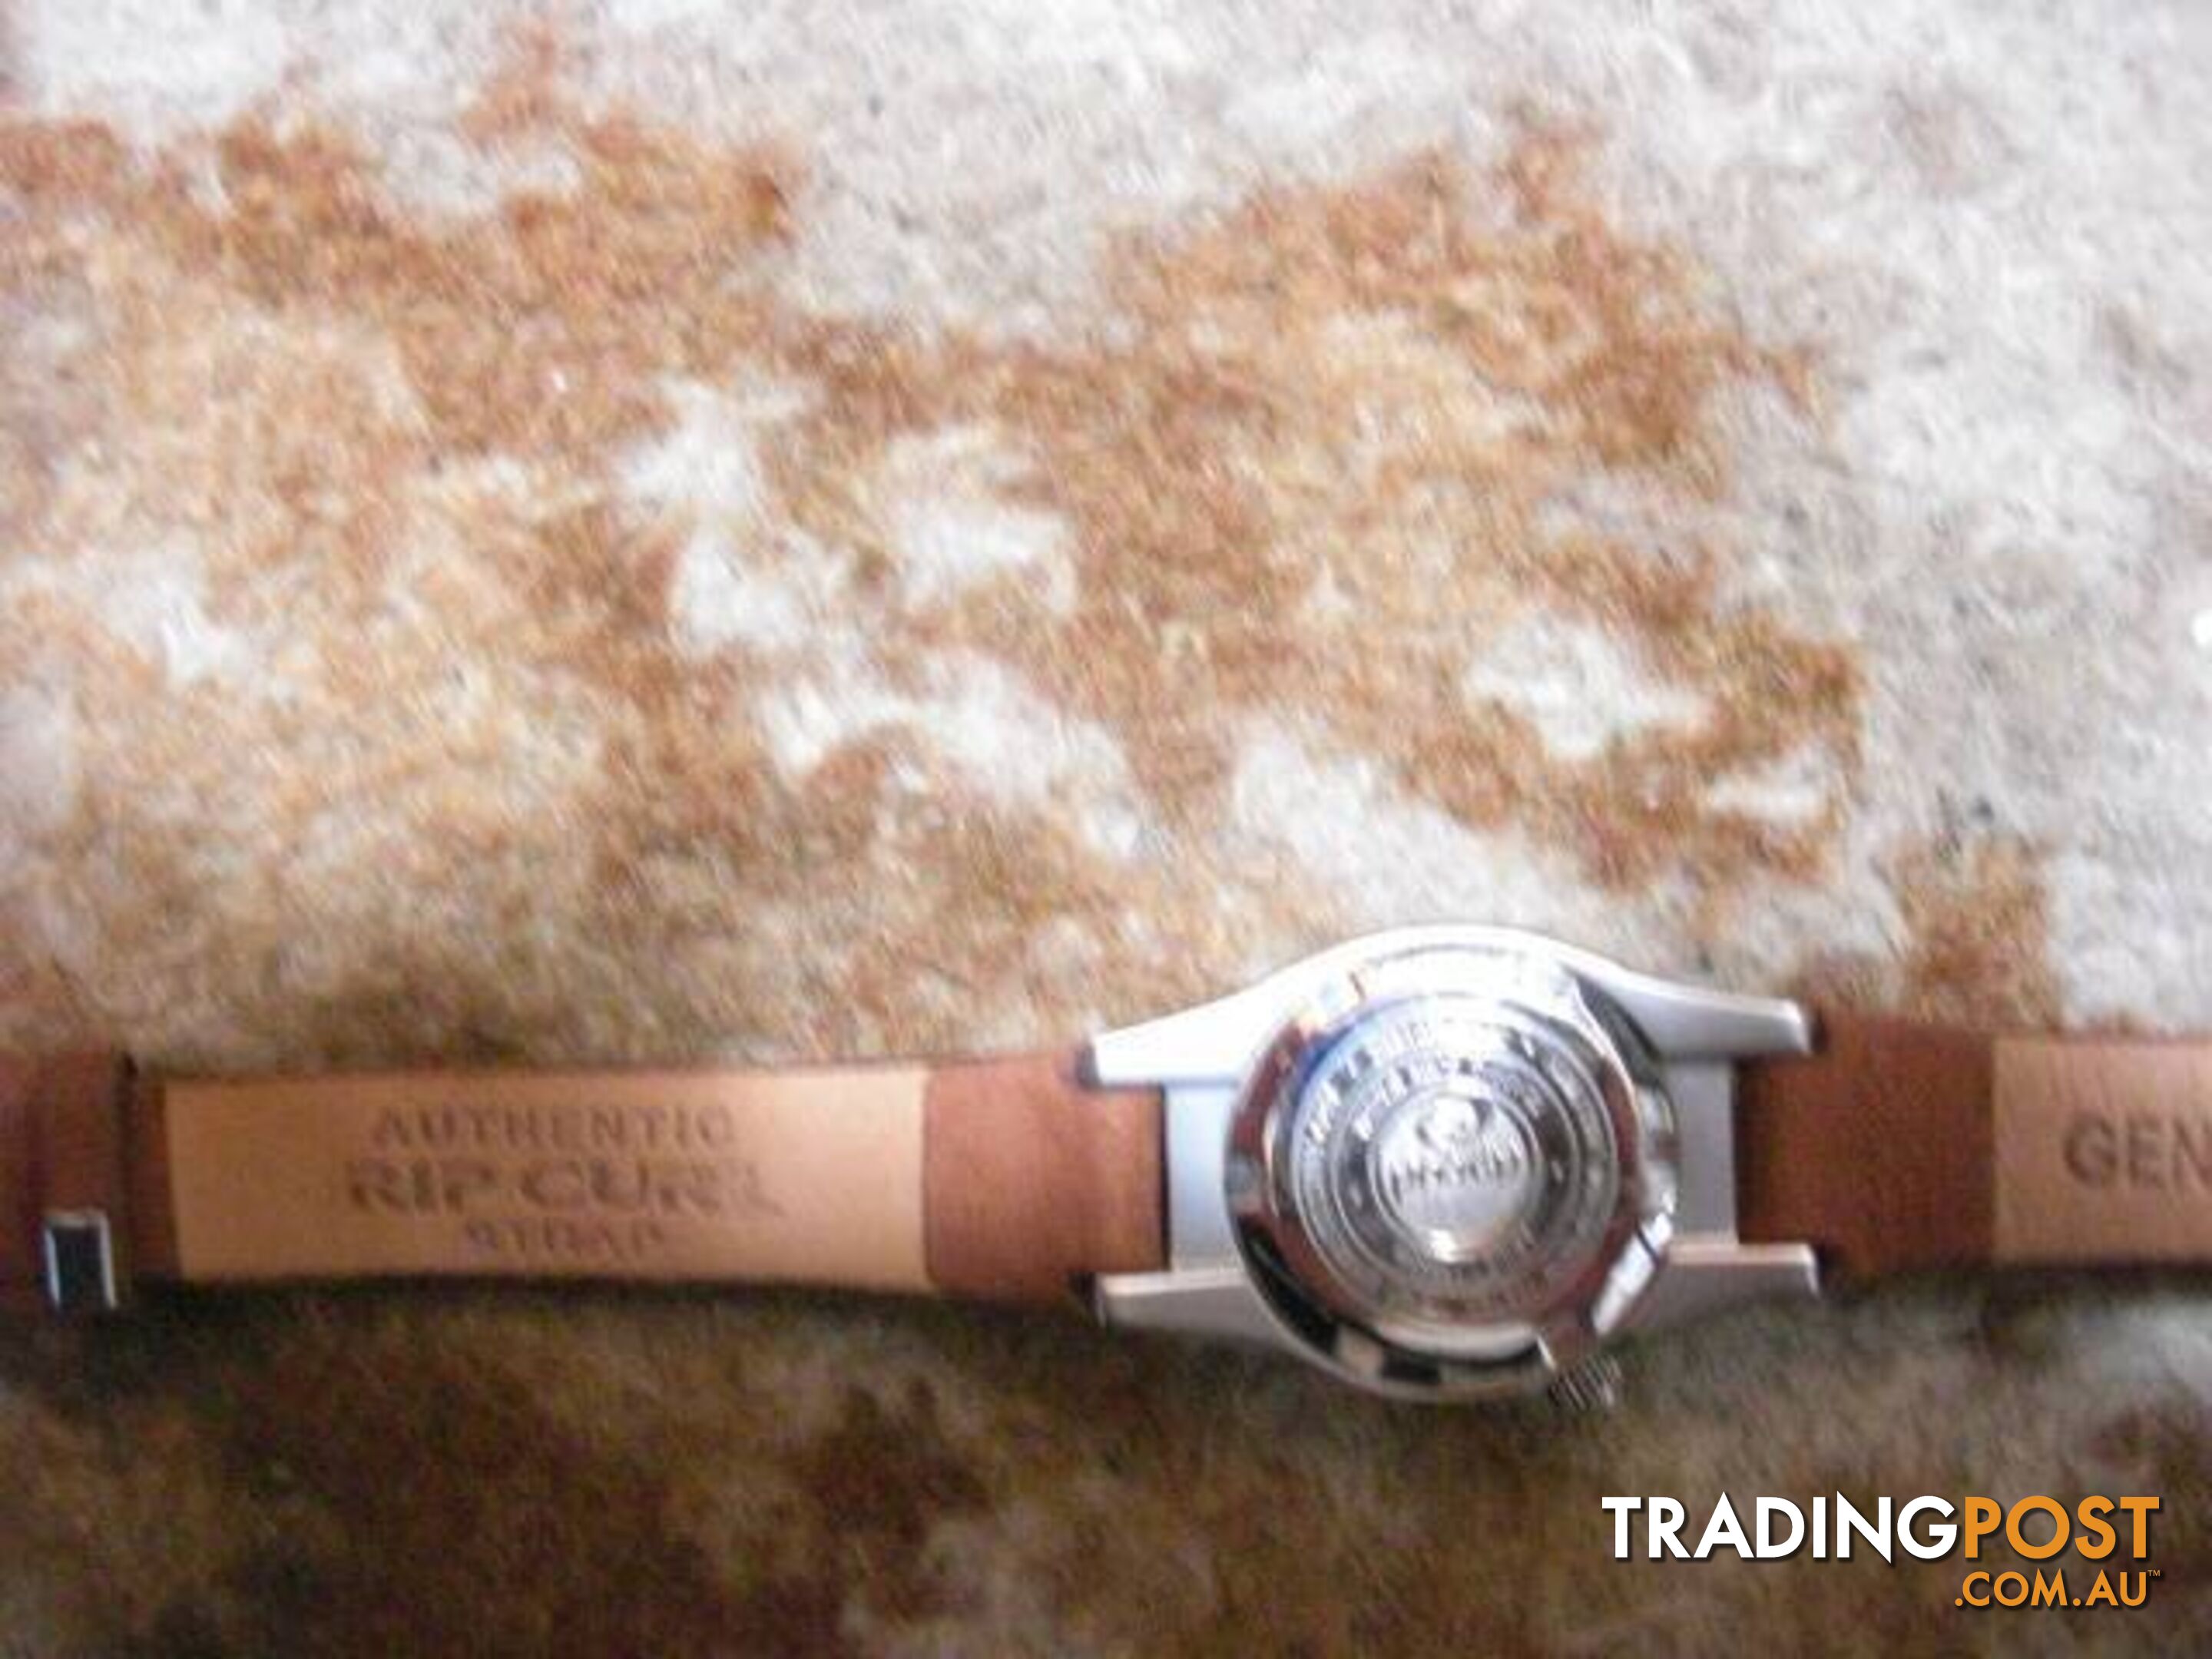 NEW RIPCURL WATCH UNWANTED GIFT NEVER WORN WATERPROOF PICKUP OR